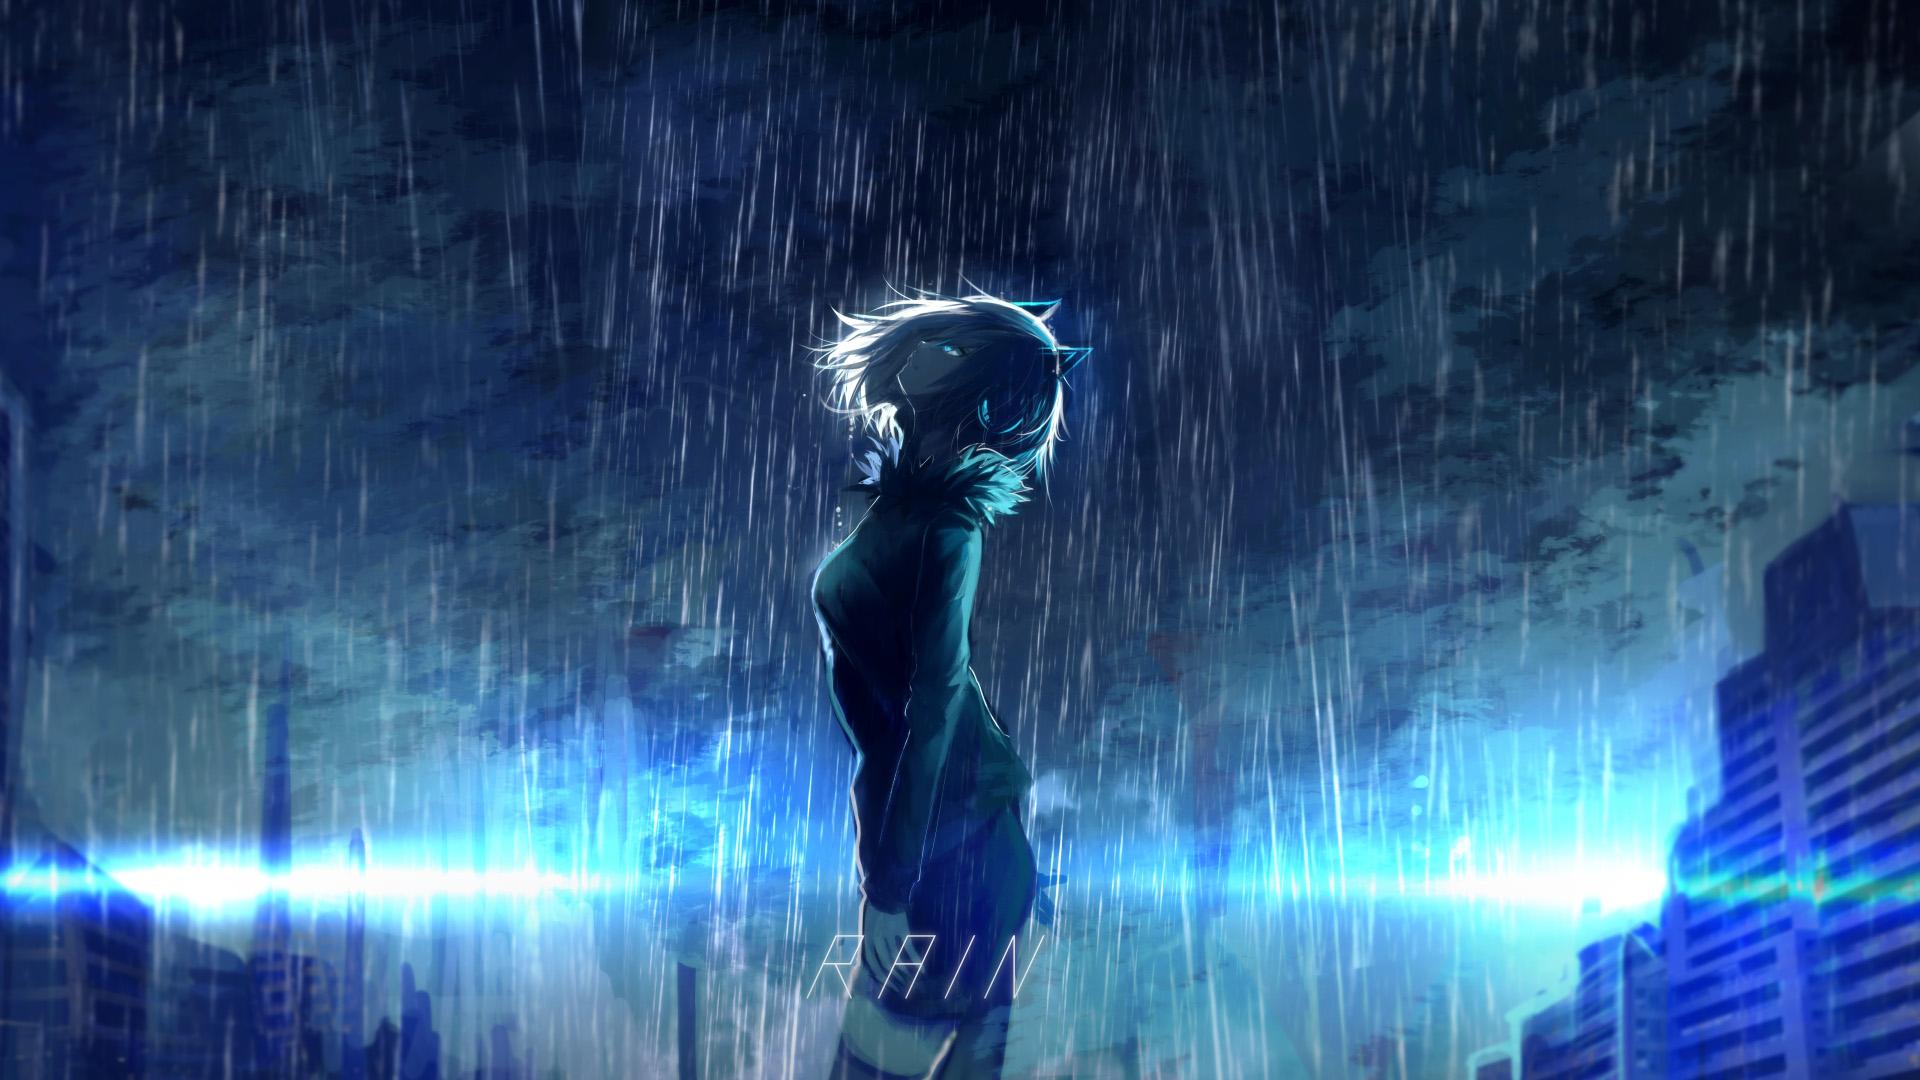 Rainy Day Anime Wallpapers - Top Free Rainy Day Anime Backgrounds - WallpaperAccess